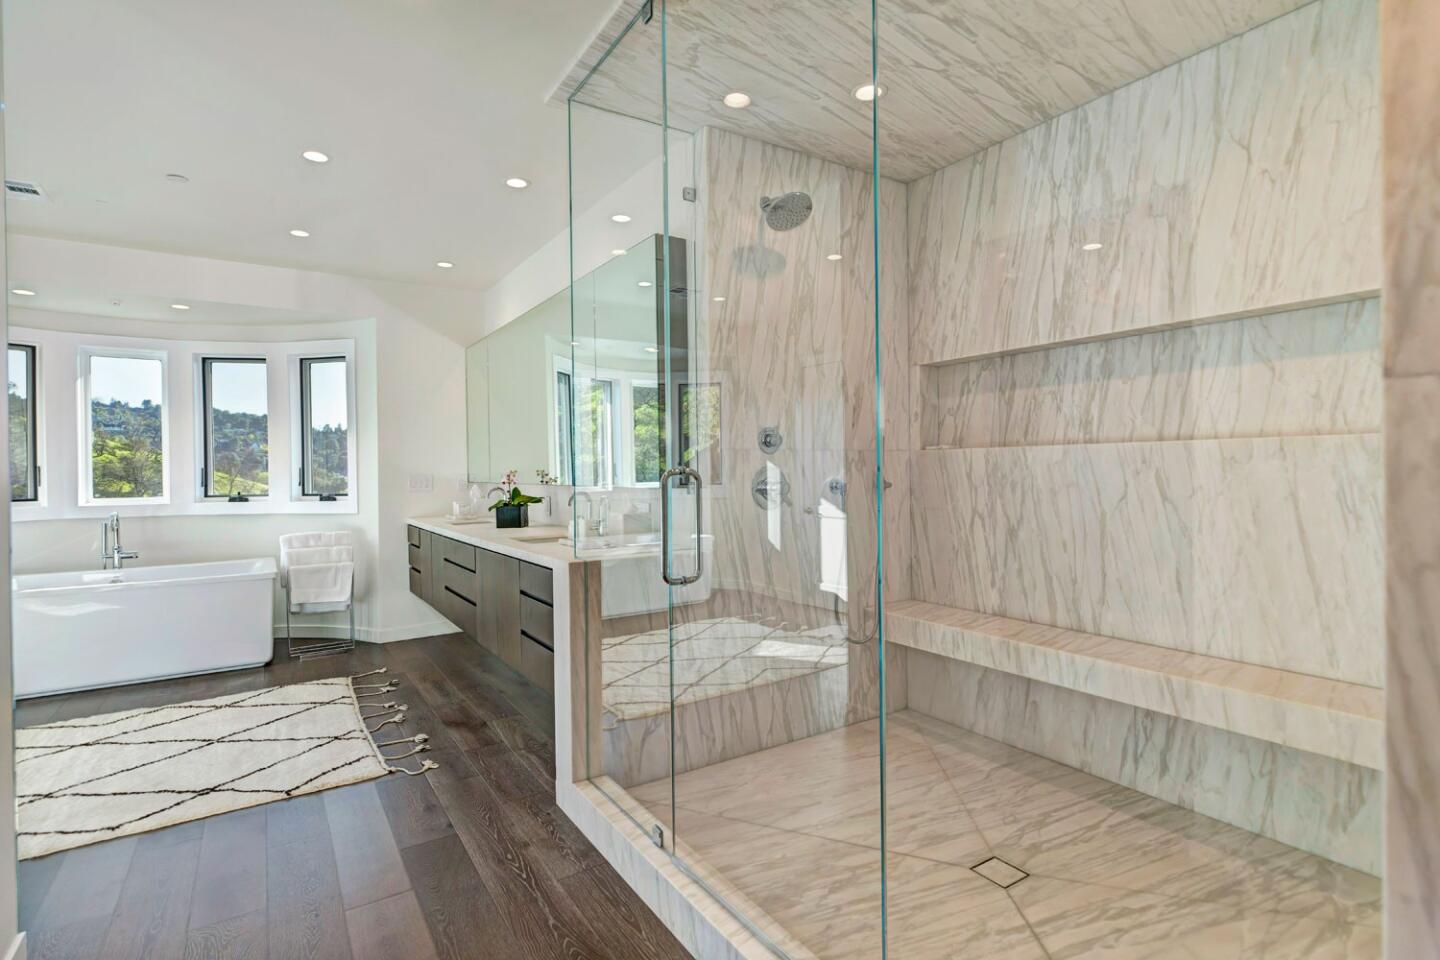 The master bath is spa-like with an ample use of marble and glass.